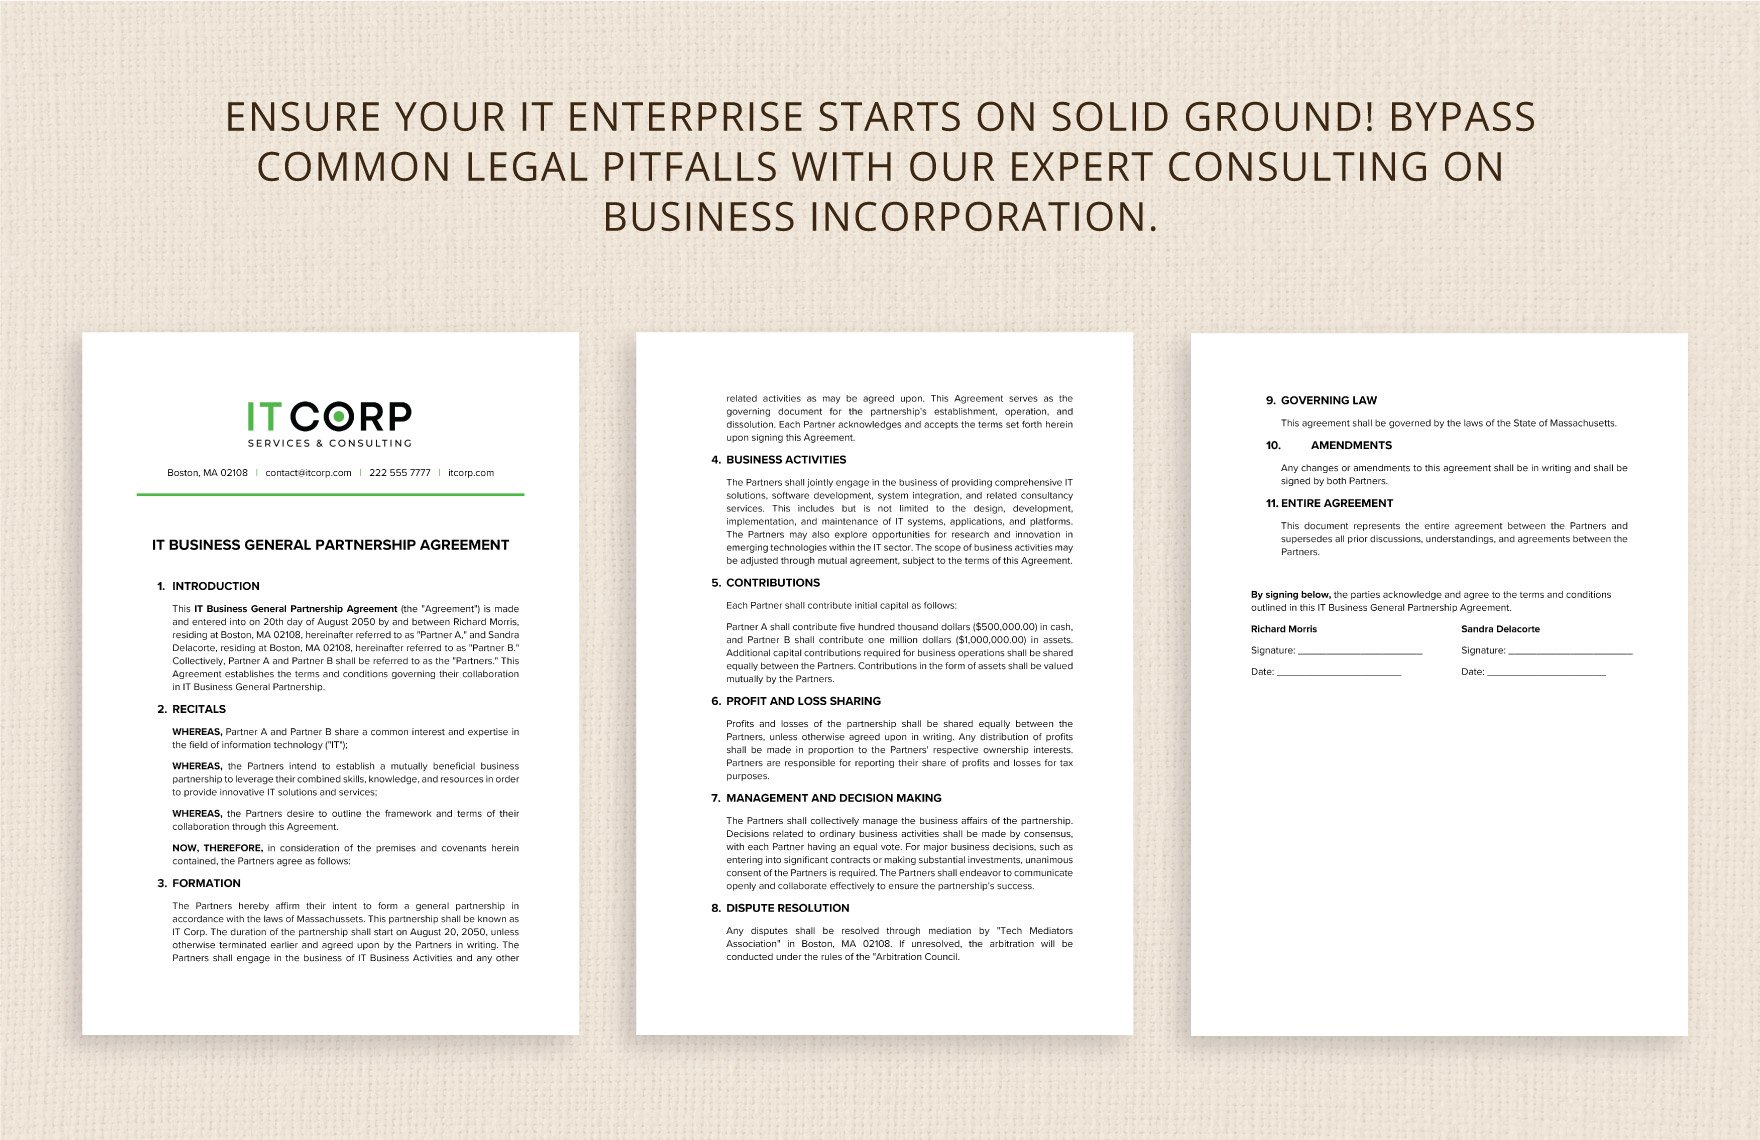 IT Business General Partnership Agreement Template